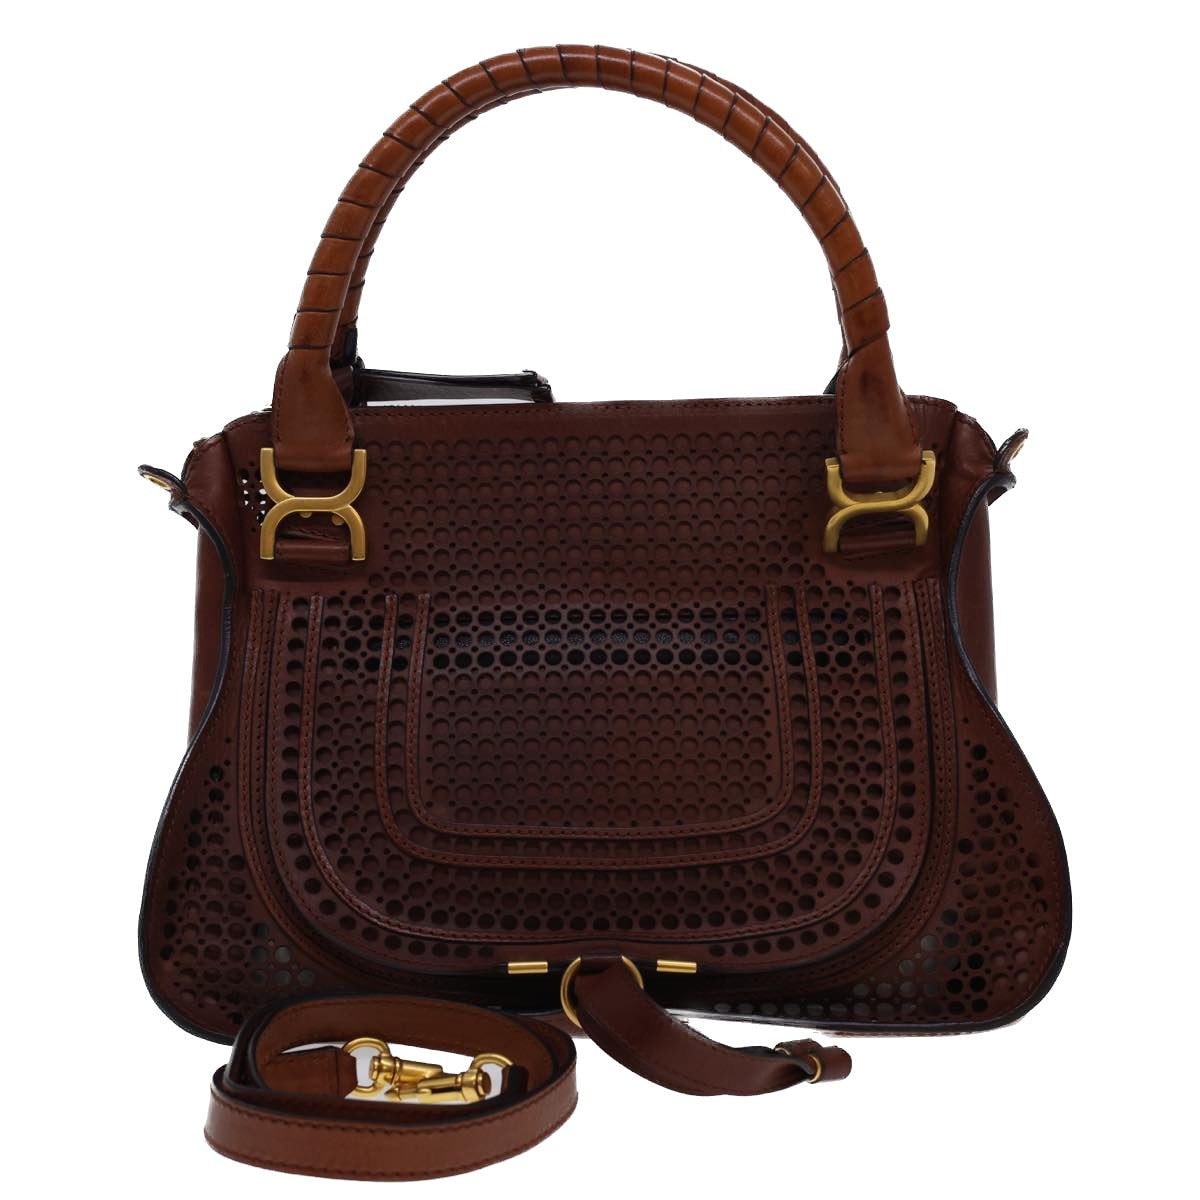 Chloe Punching Mercy Hand Bag Leather 2way Brown Auth am4269